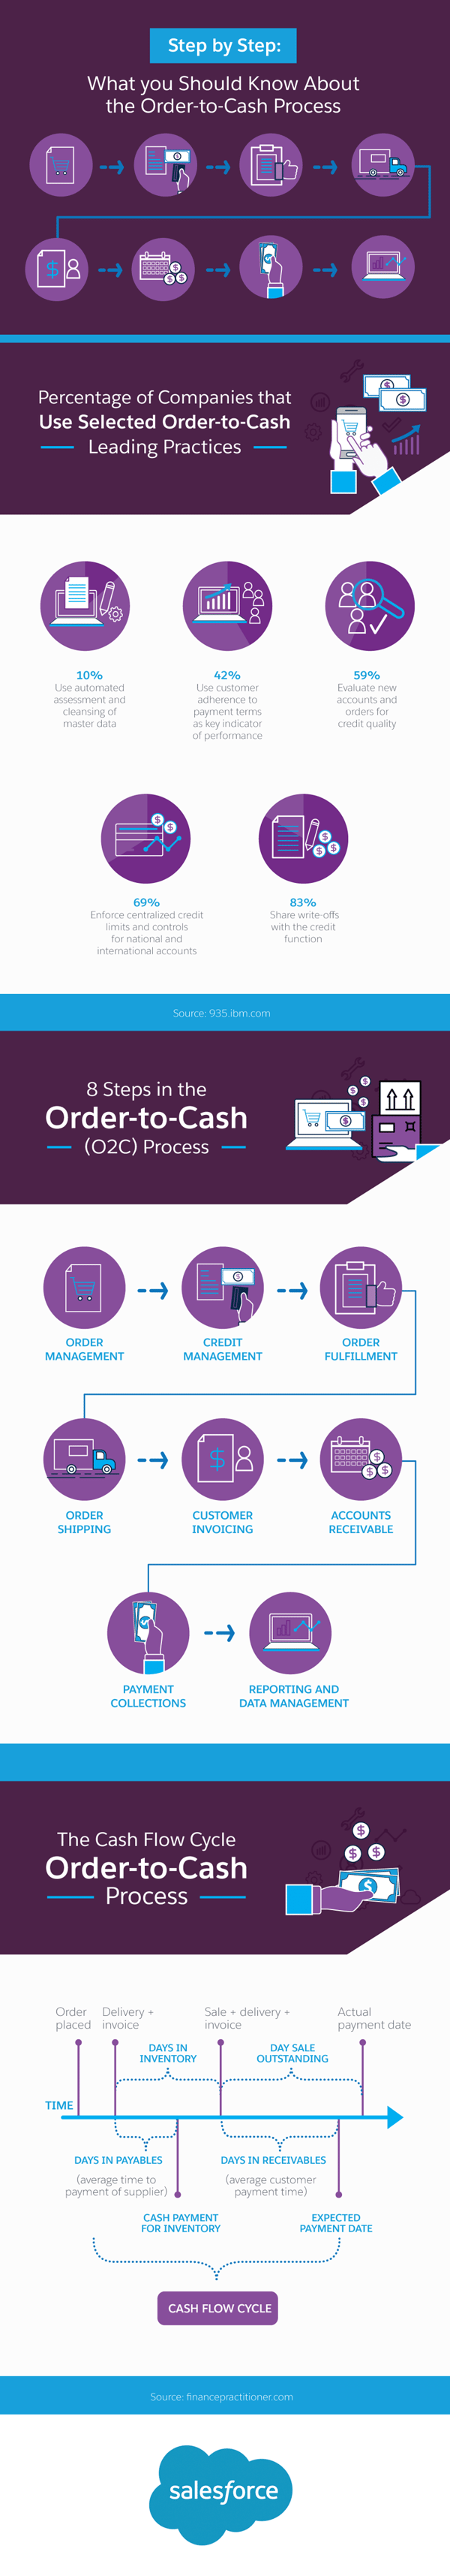 what-you-should-know-about-the-order-to-cash-process-embed